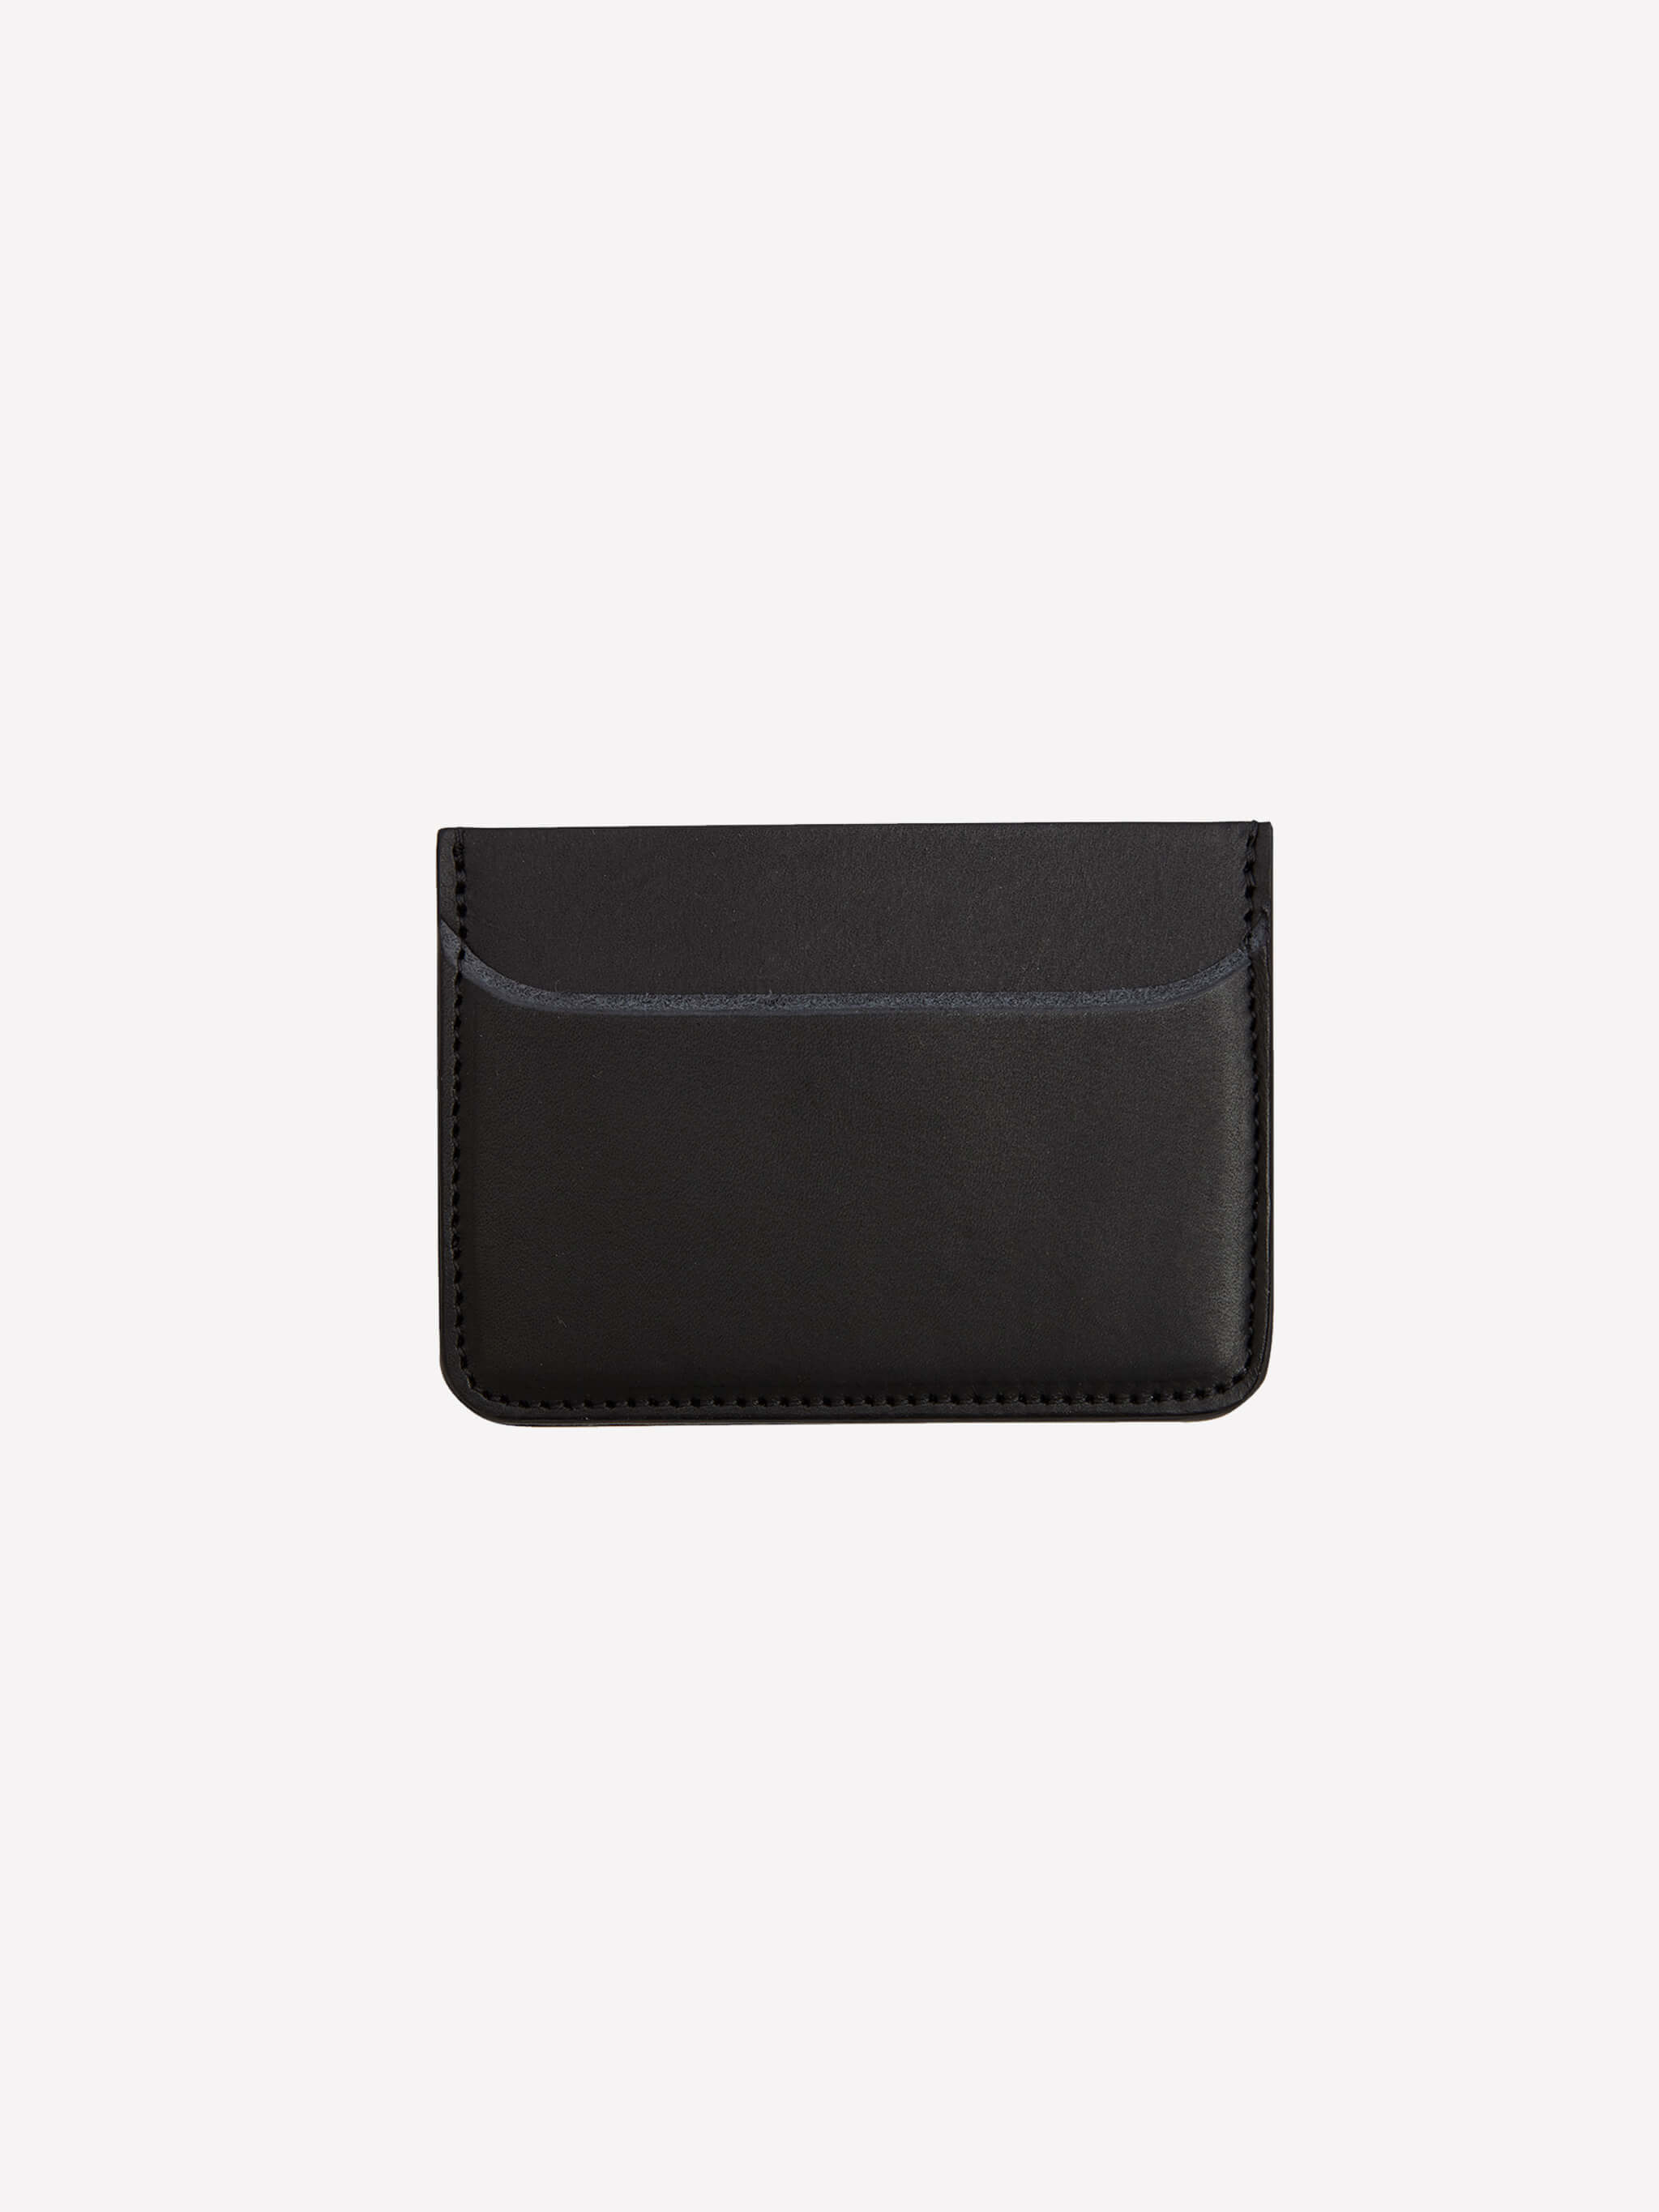 Socon Crafted Leather Cardholder - Black